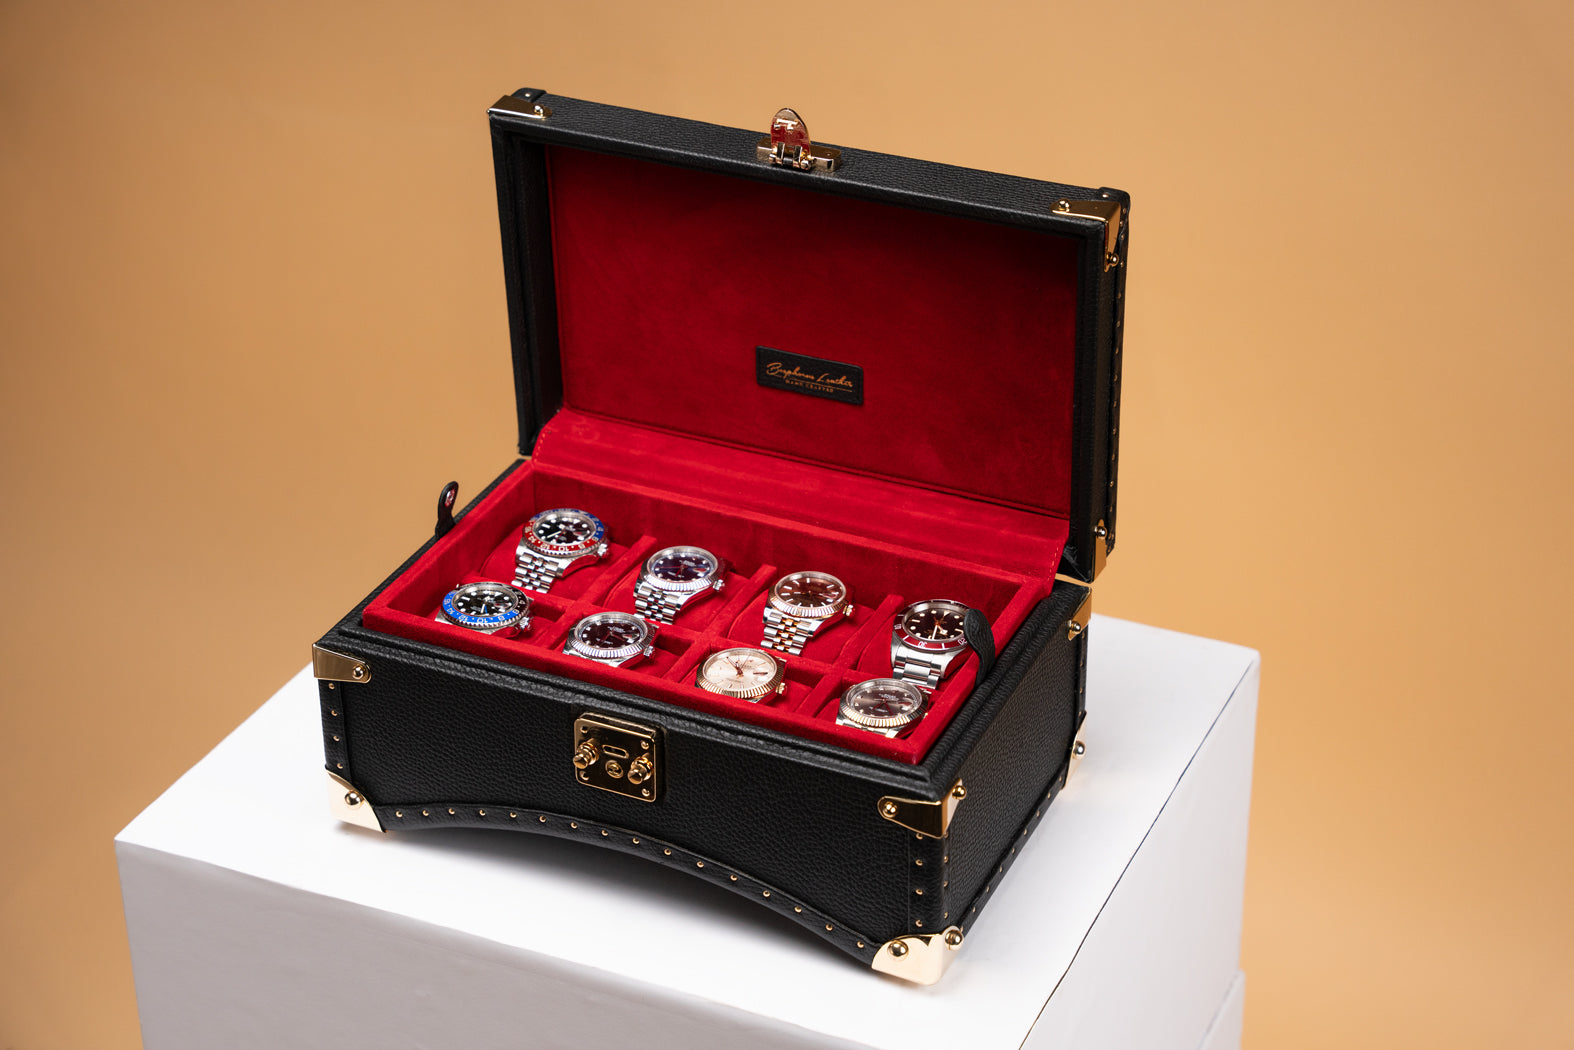 Petra Oval Watch Case - Togo Black For 8 Watches